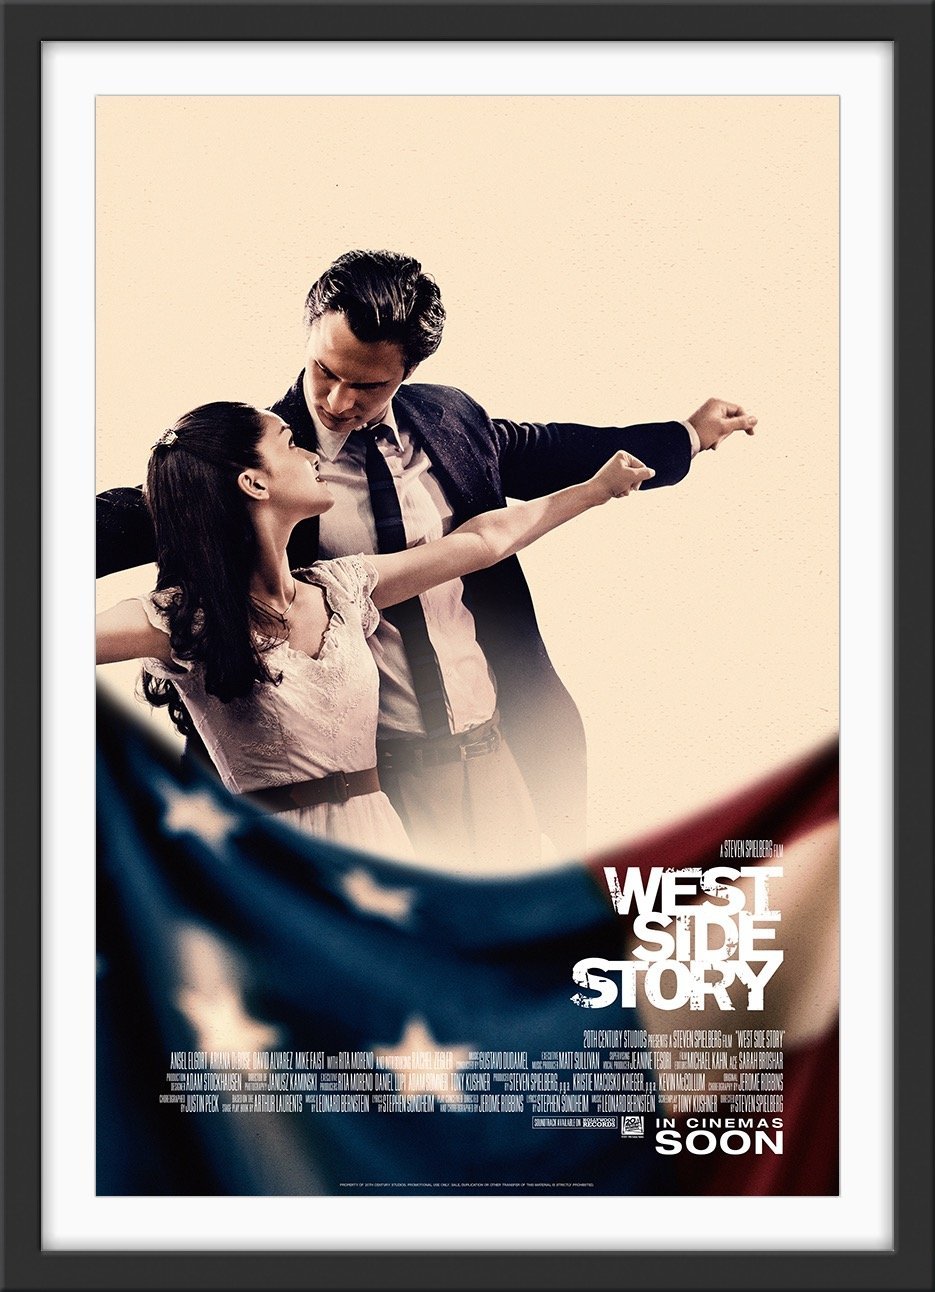 An original movie poster for Steven Spielberg's West Side Story